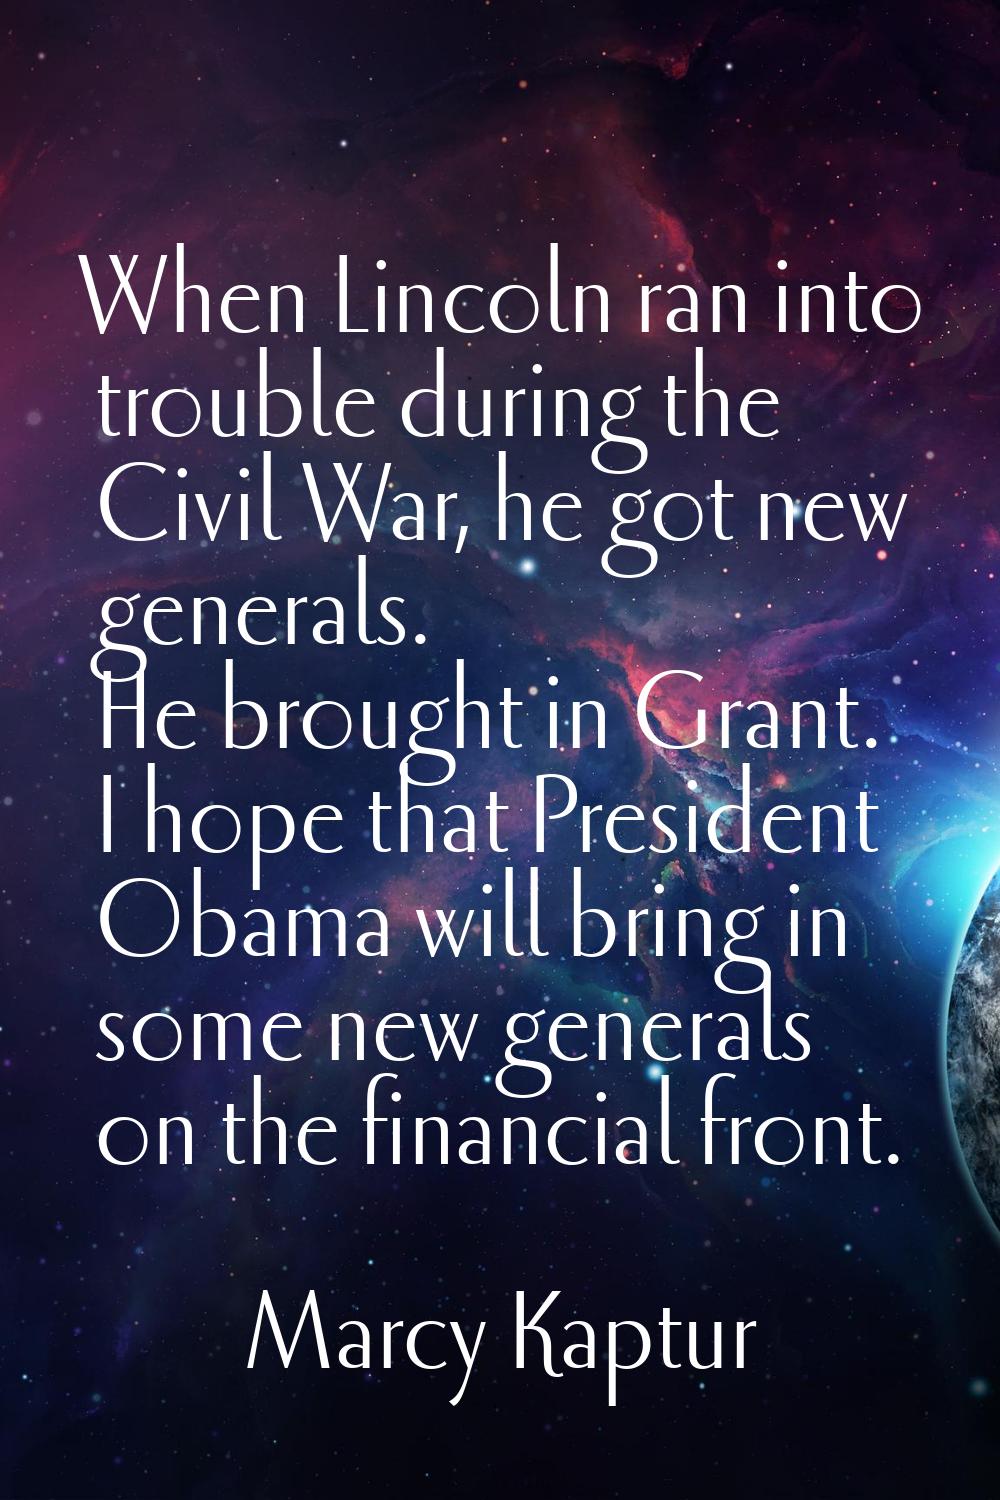 When Lincoln ran into trouble during the Civil War, he got new generals. He brought in Grant. I hop